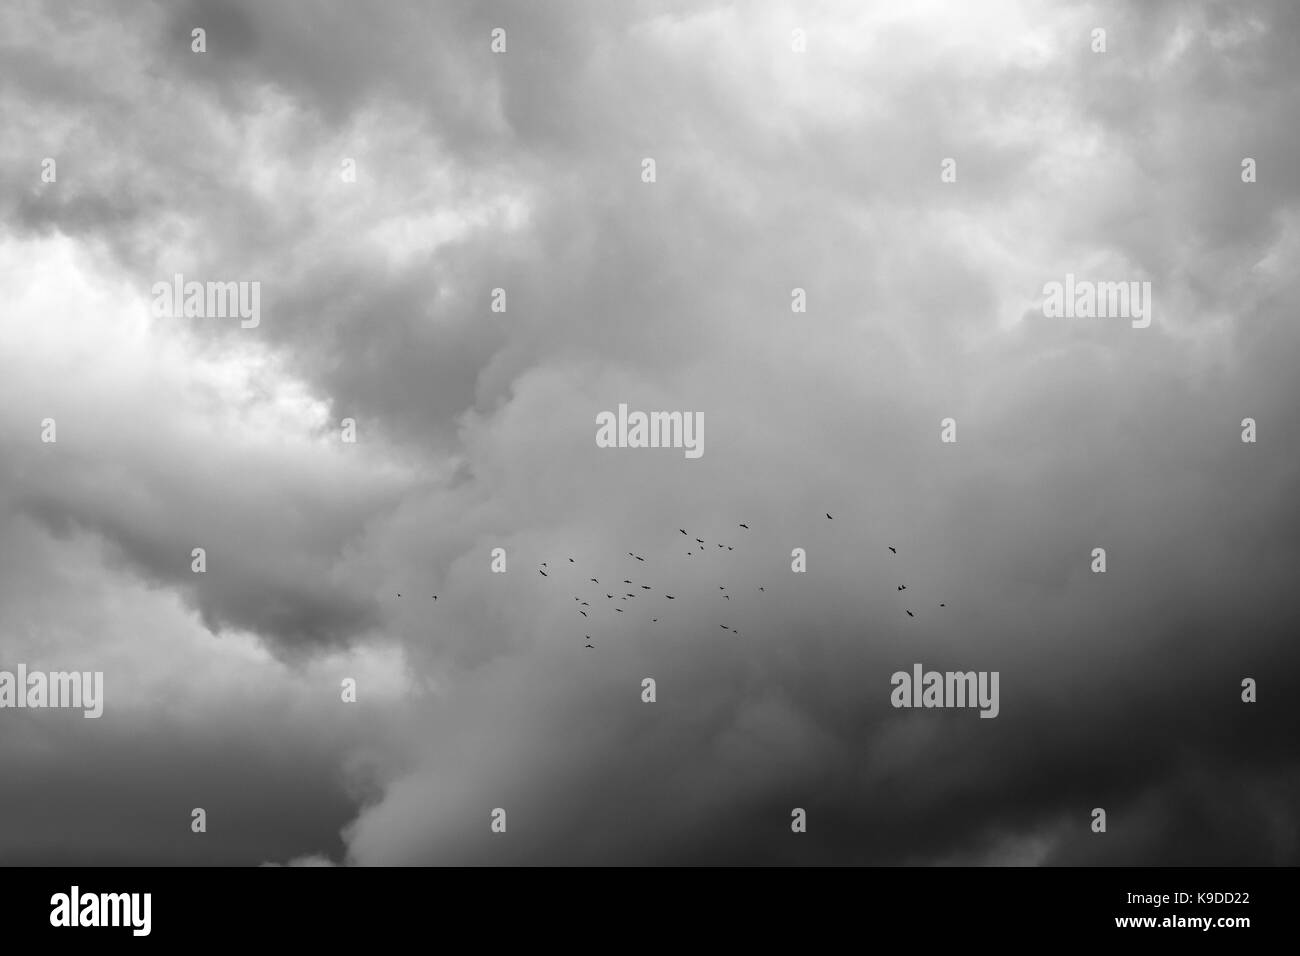 A flock of rooks or crows seen against a stormy and cloudy evening sky, moody monochrome image (Herefordshire, UK) Stock Photo